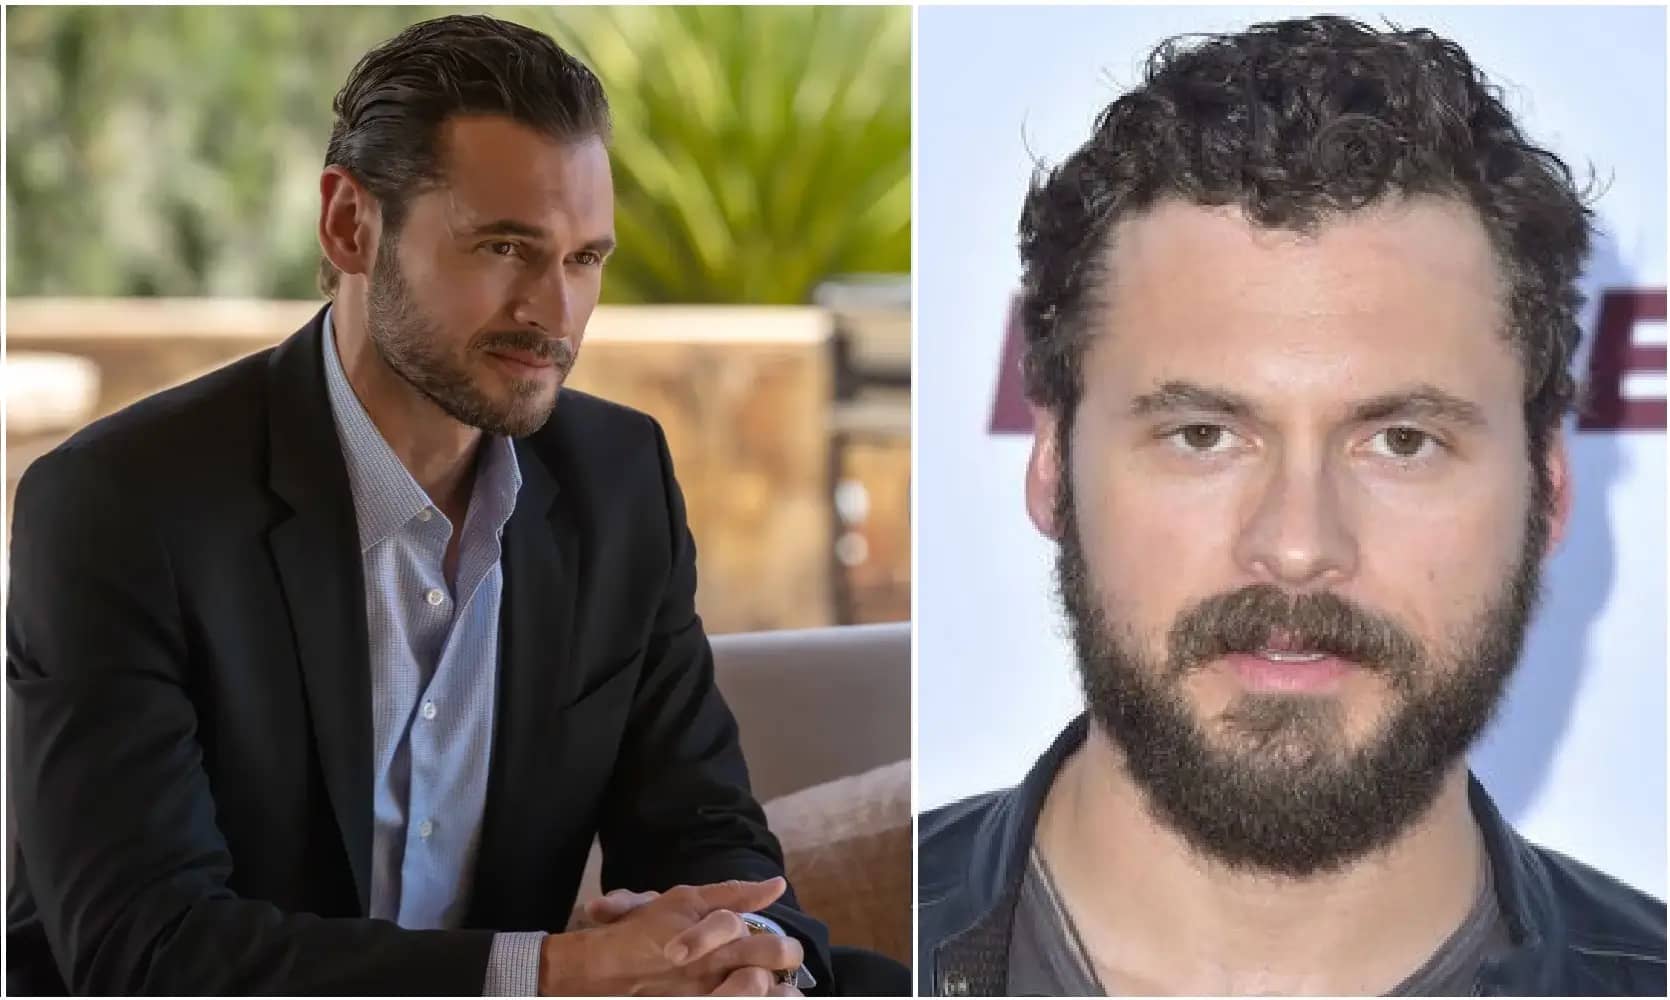 Actor Adan Canto passes away at 42 due to appendiceal cancer